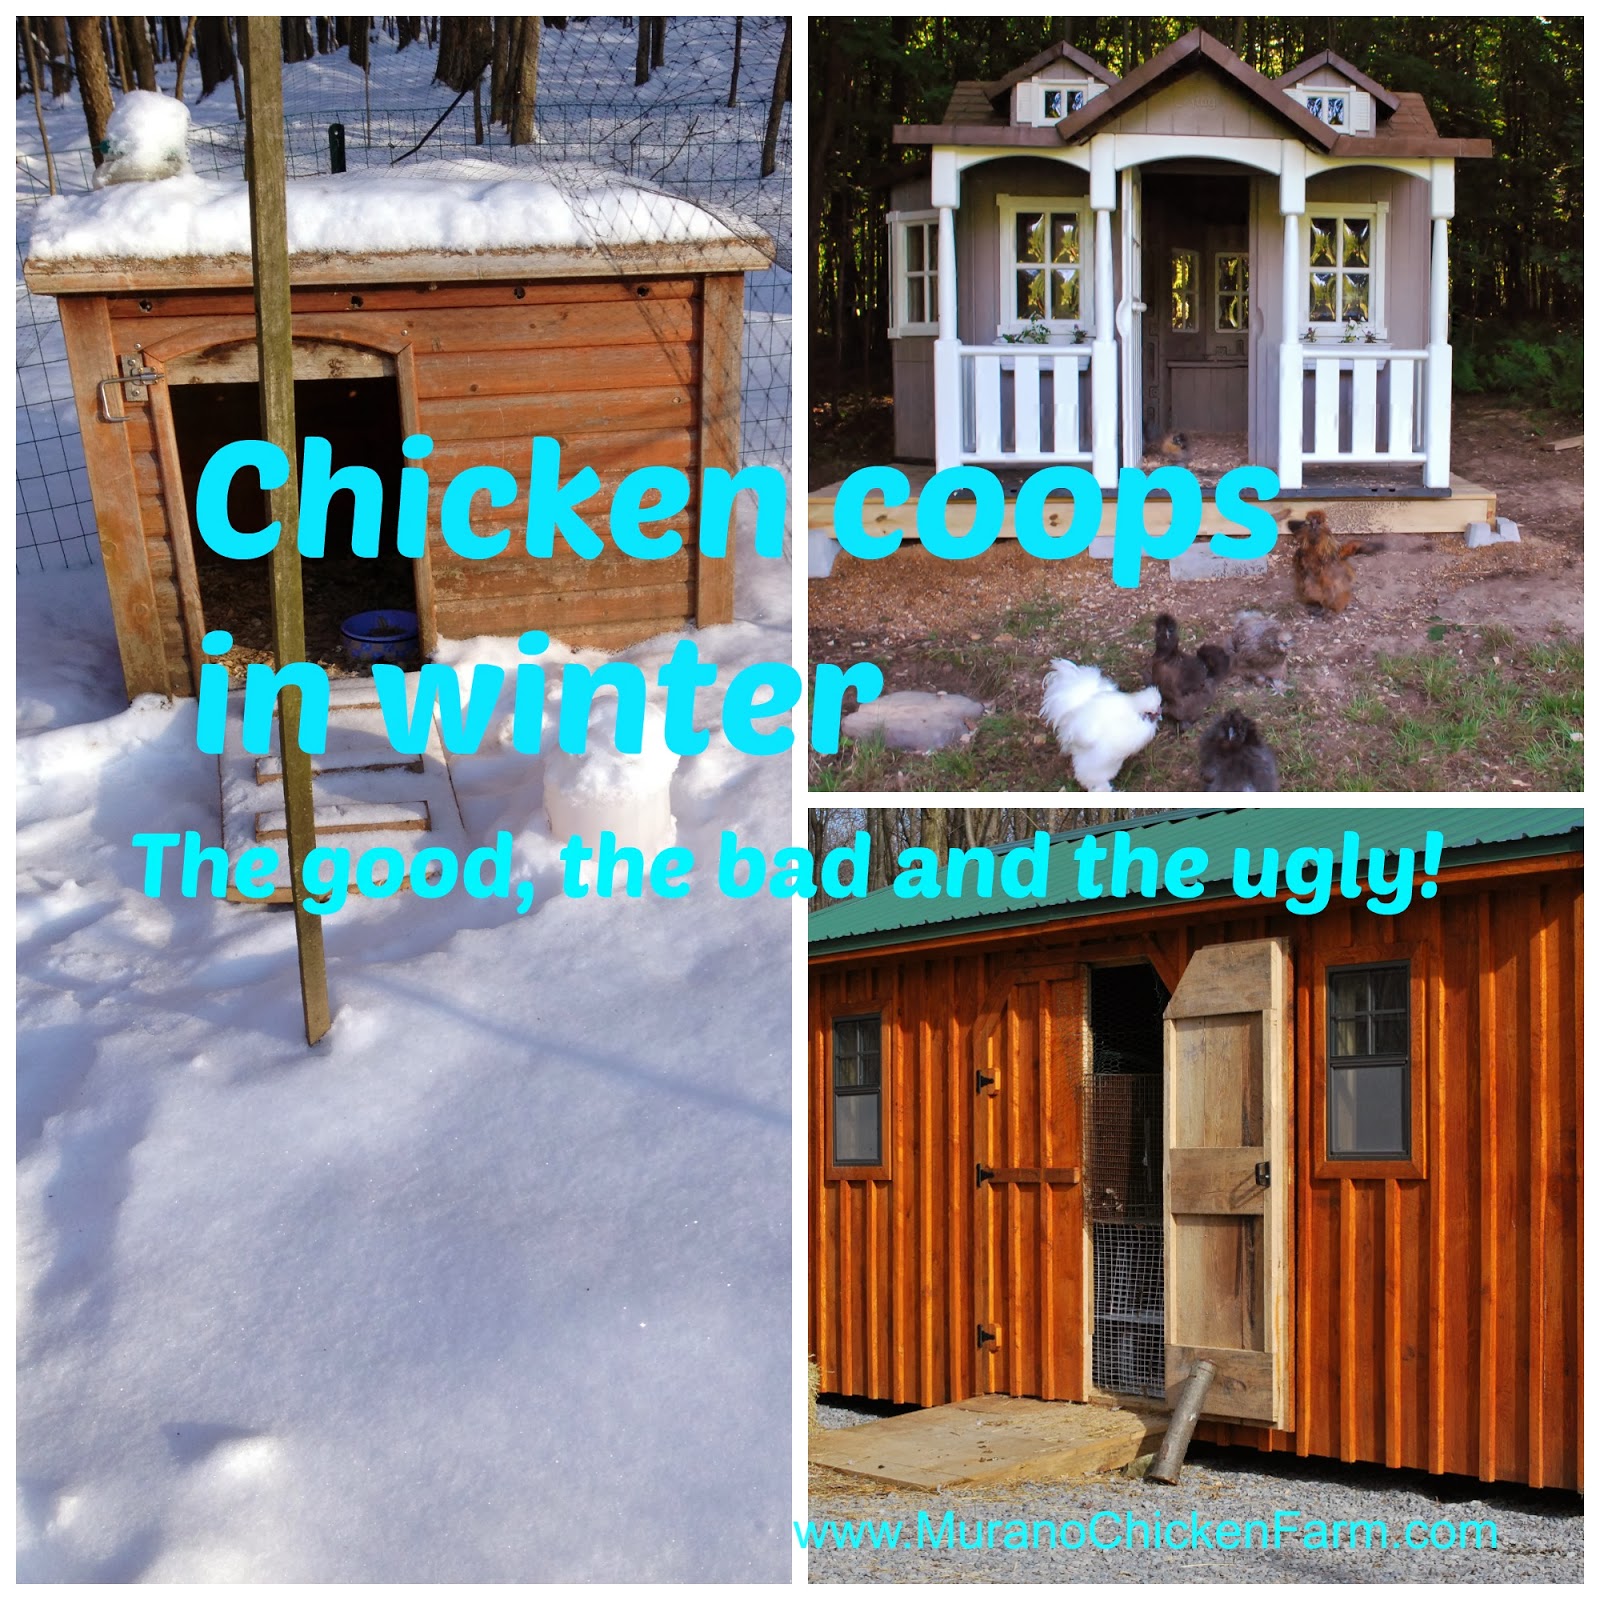 Murano Chicken Farm: Winter chicken coops: the good, bad and ugly